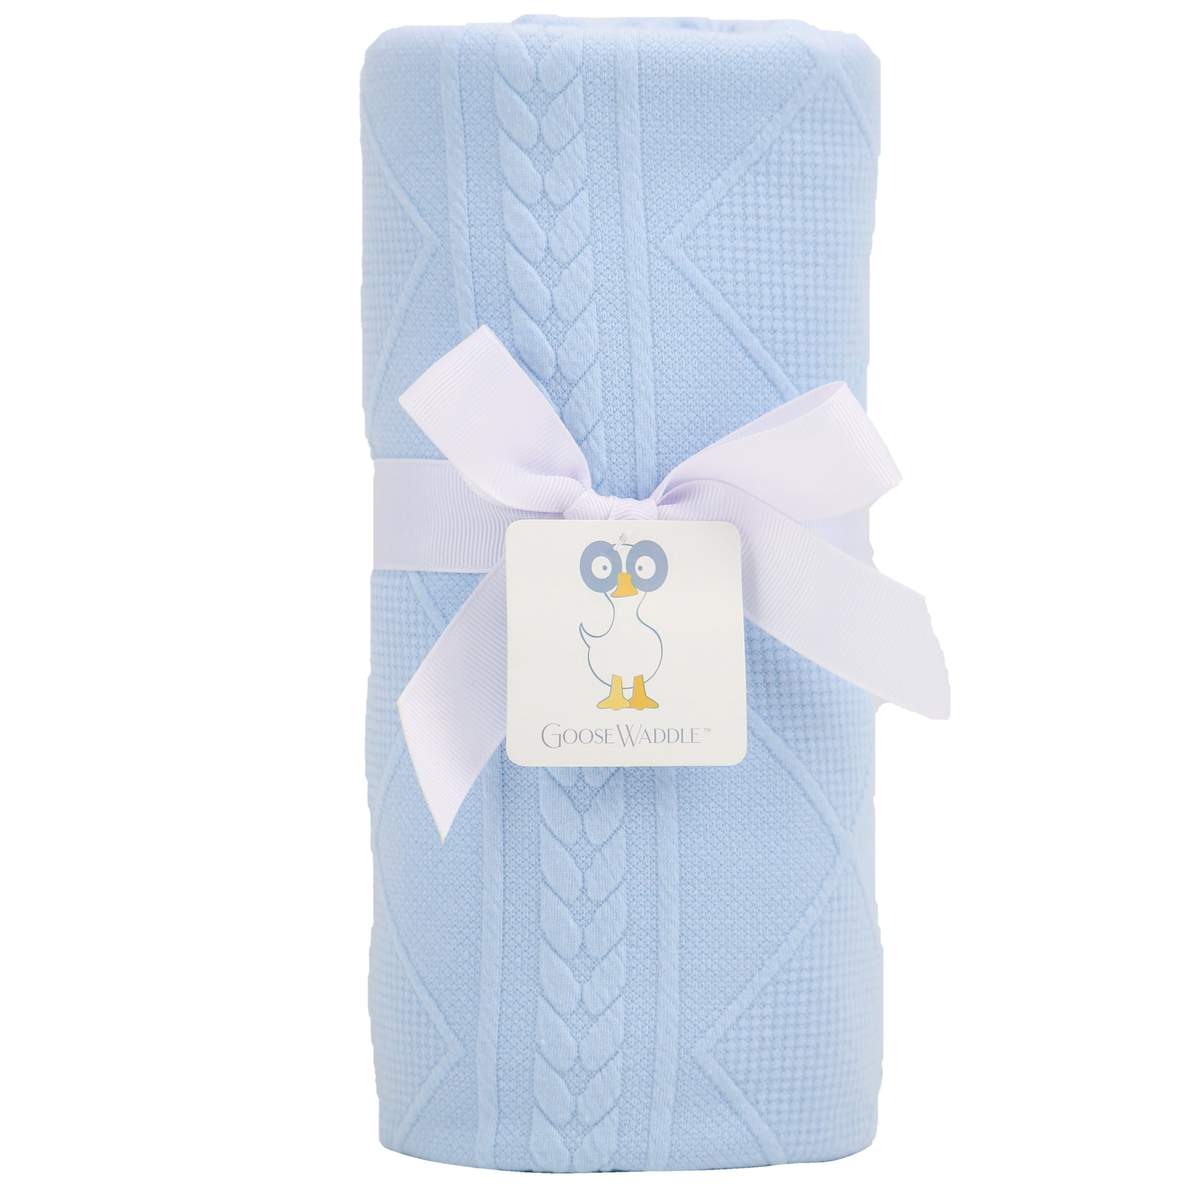 GooseWaddle Knit Blankets, Assorted Colors